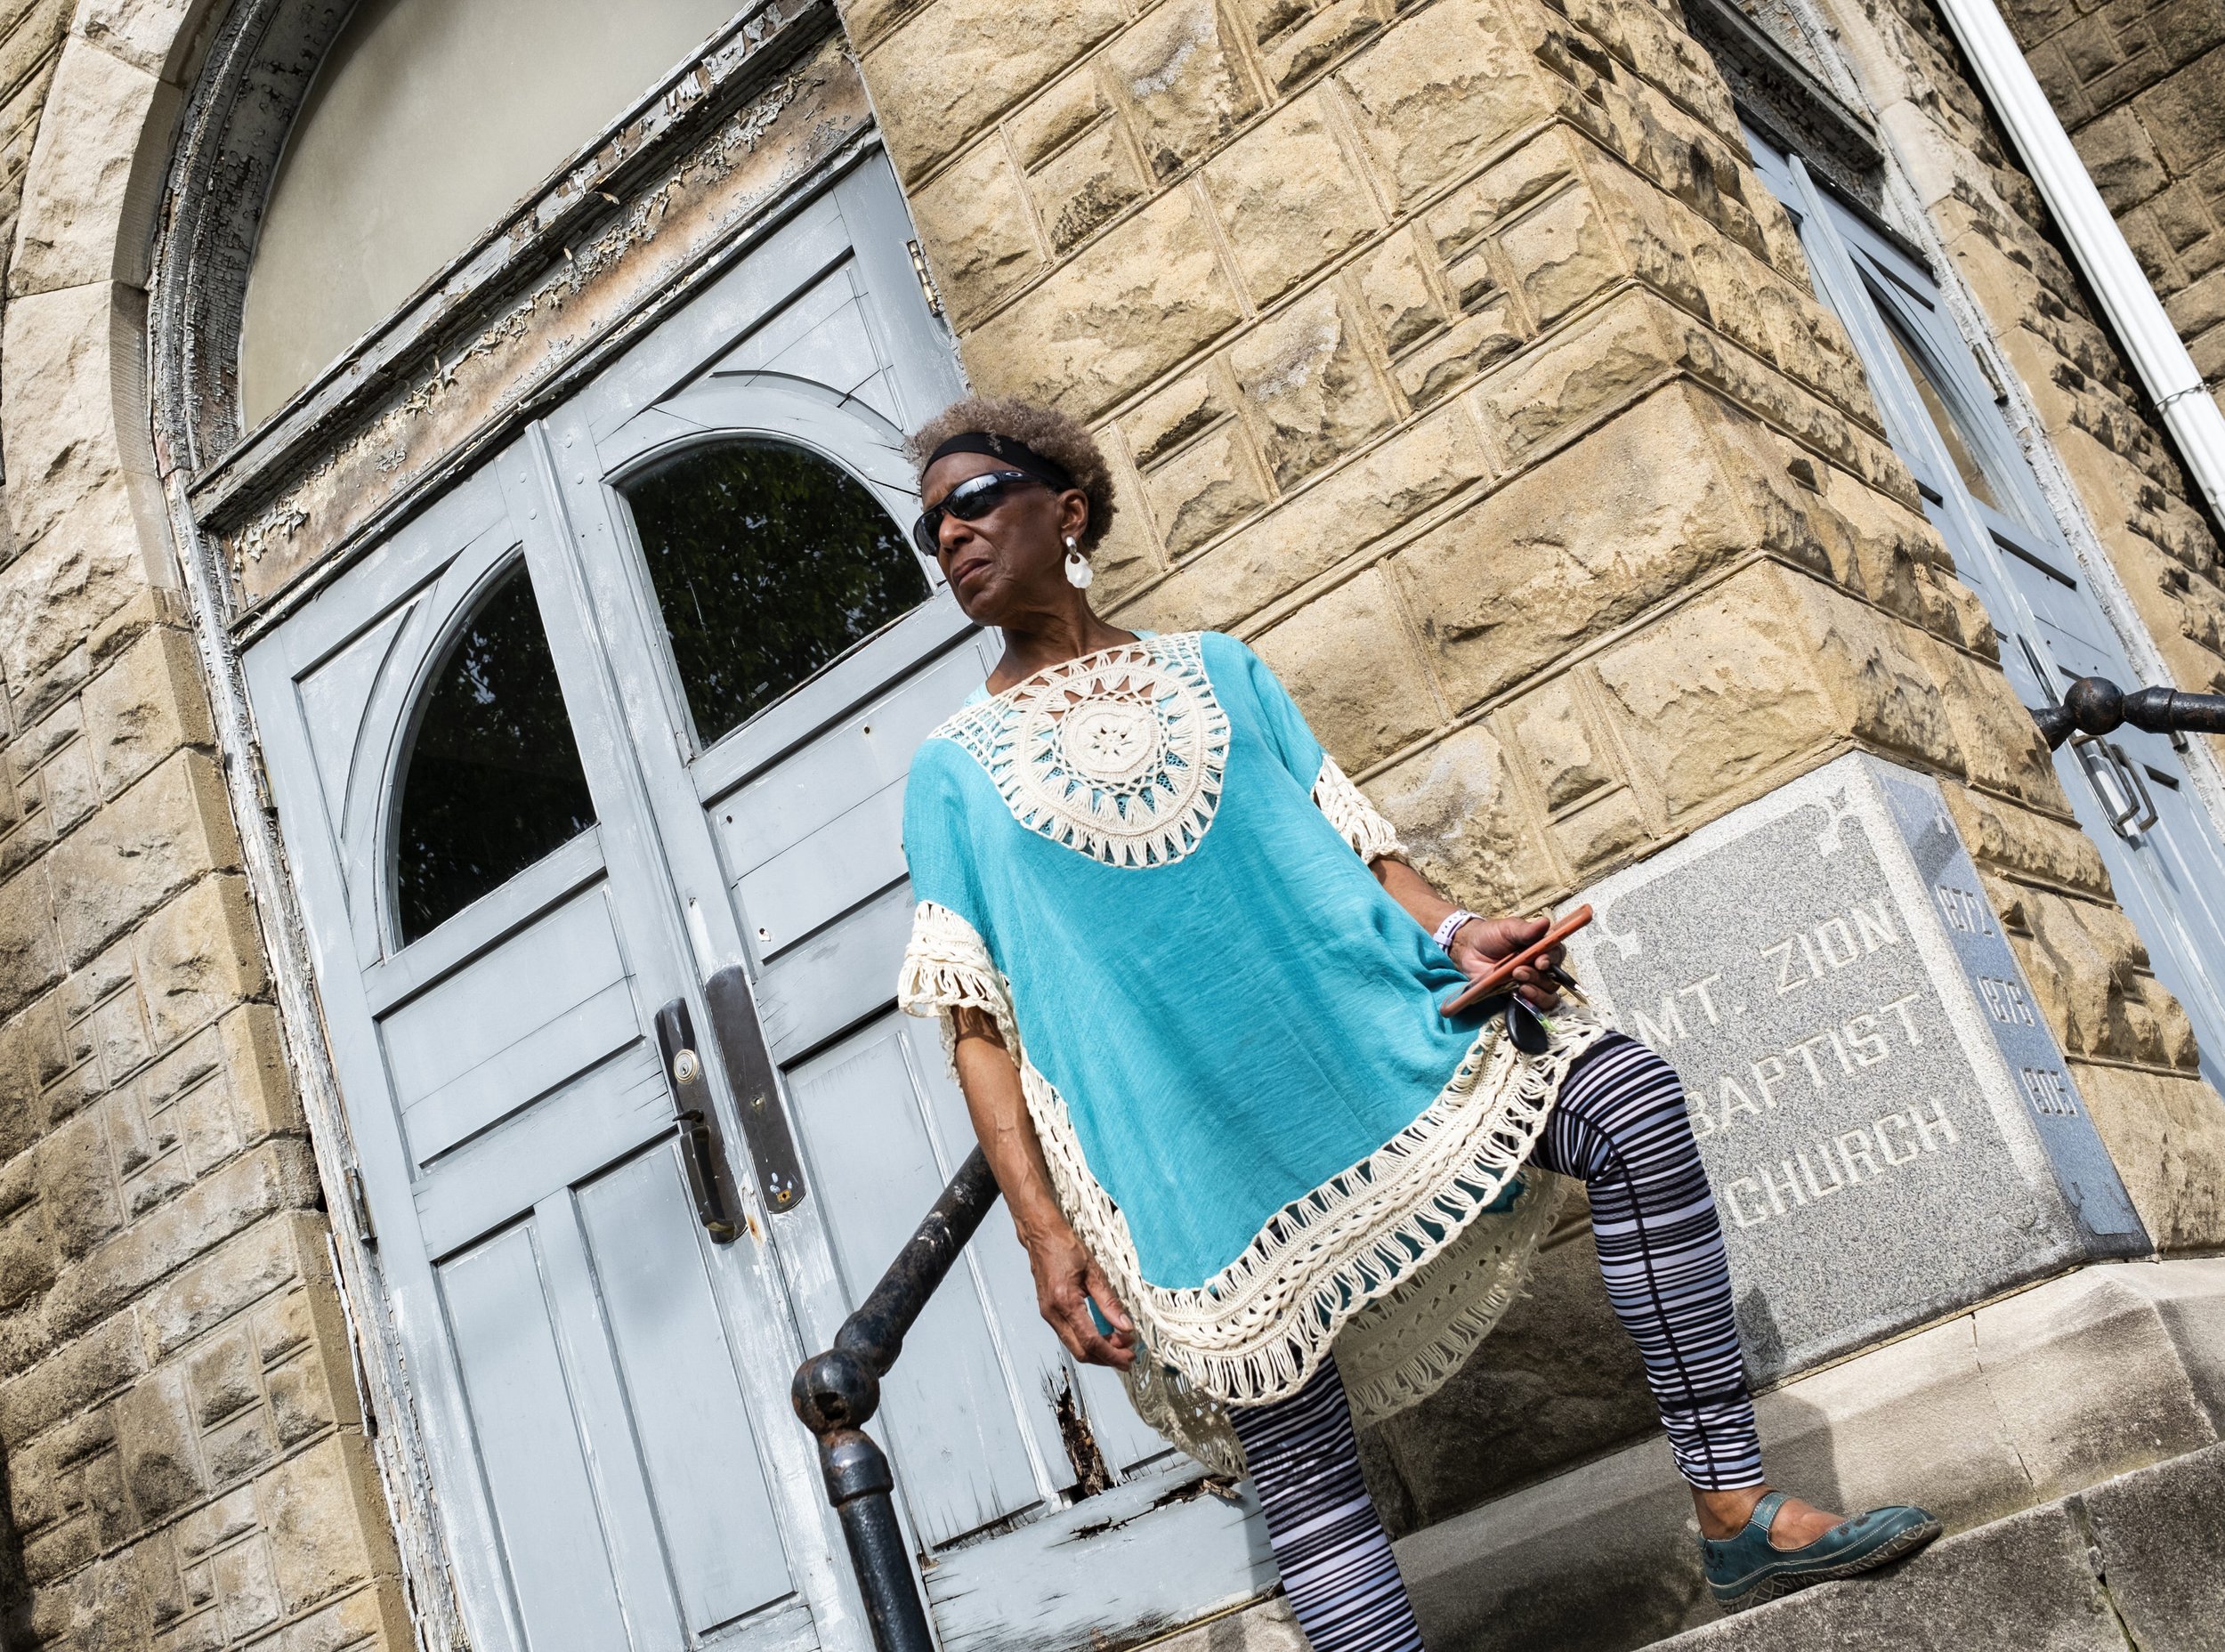  Mount Zion Baptist Church Preservation Society board member Dr. Tee Ford-Ahmed looks on while explaining the history and significance of the church next to its cornerstone in Athens, Ohio Thursday April 20, 2023. According to Mount Zion Baptist Chur